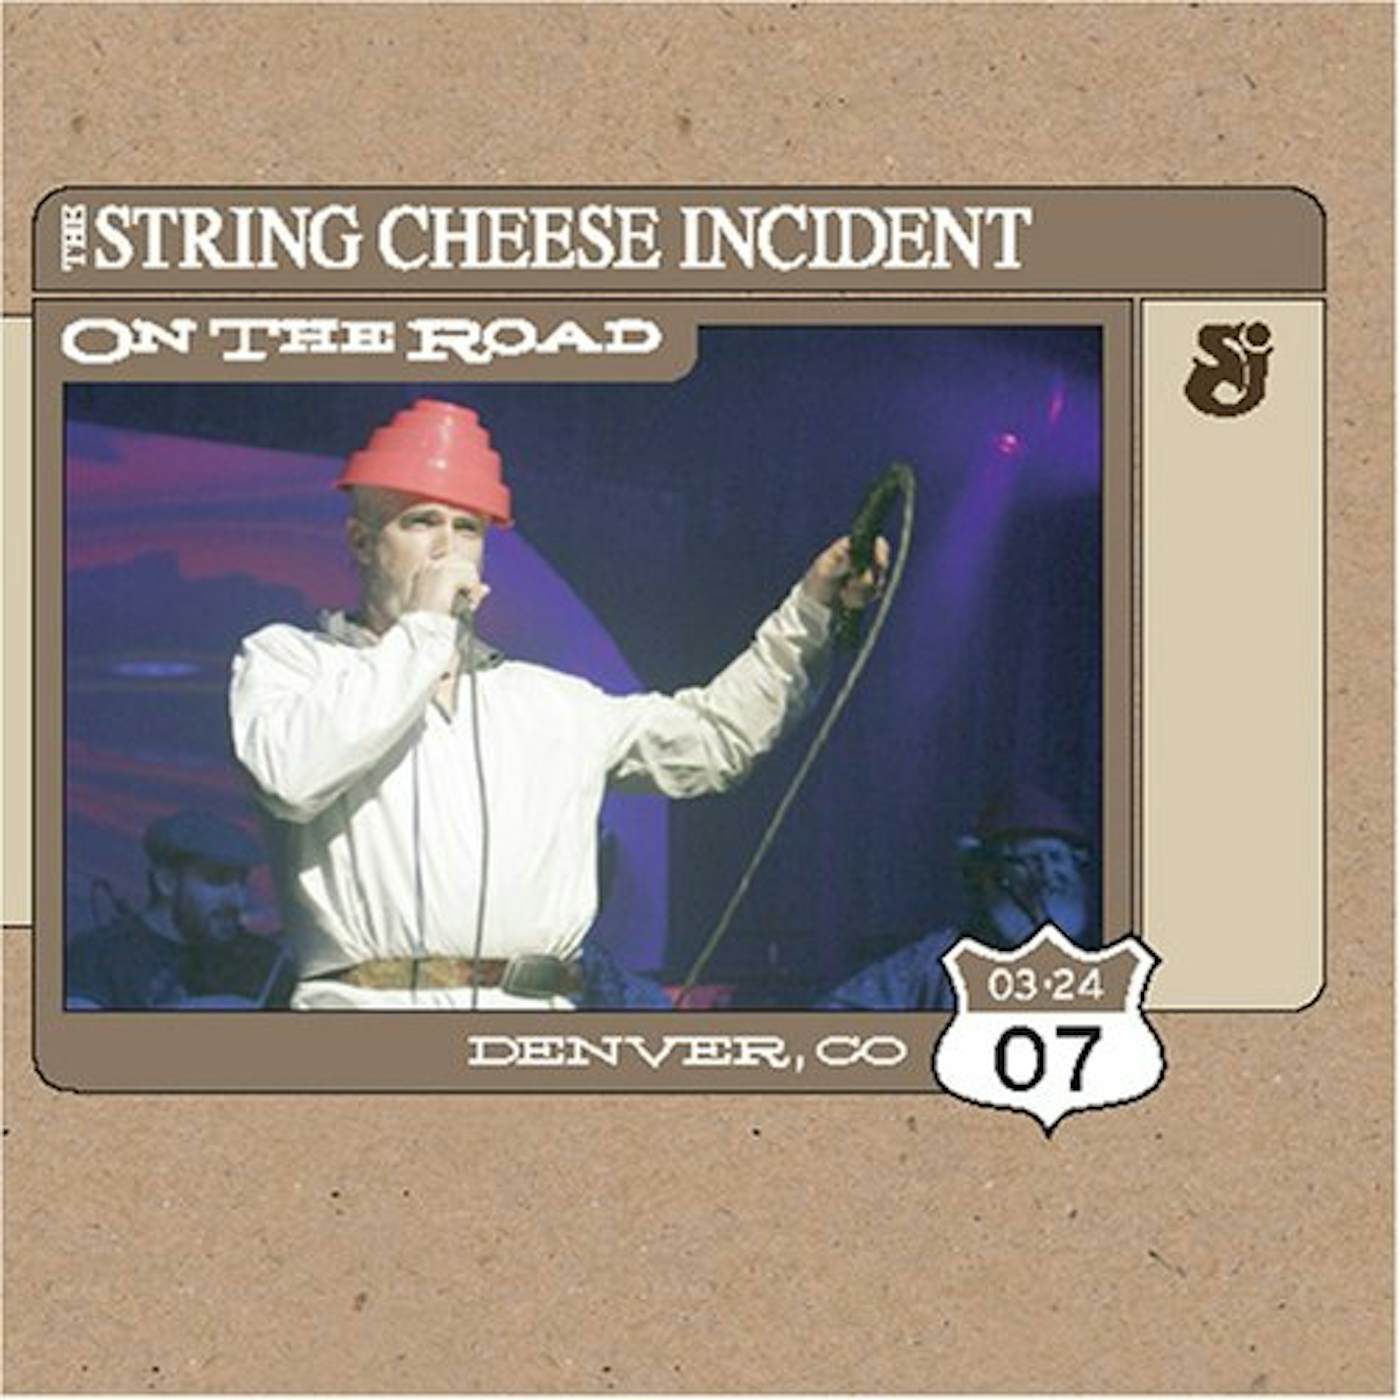 The String Cheese Incident ON THE ROAD: DENVER CO 3-24-7 CD